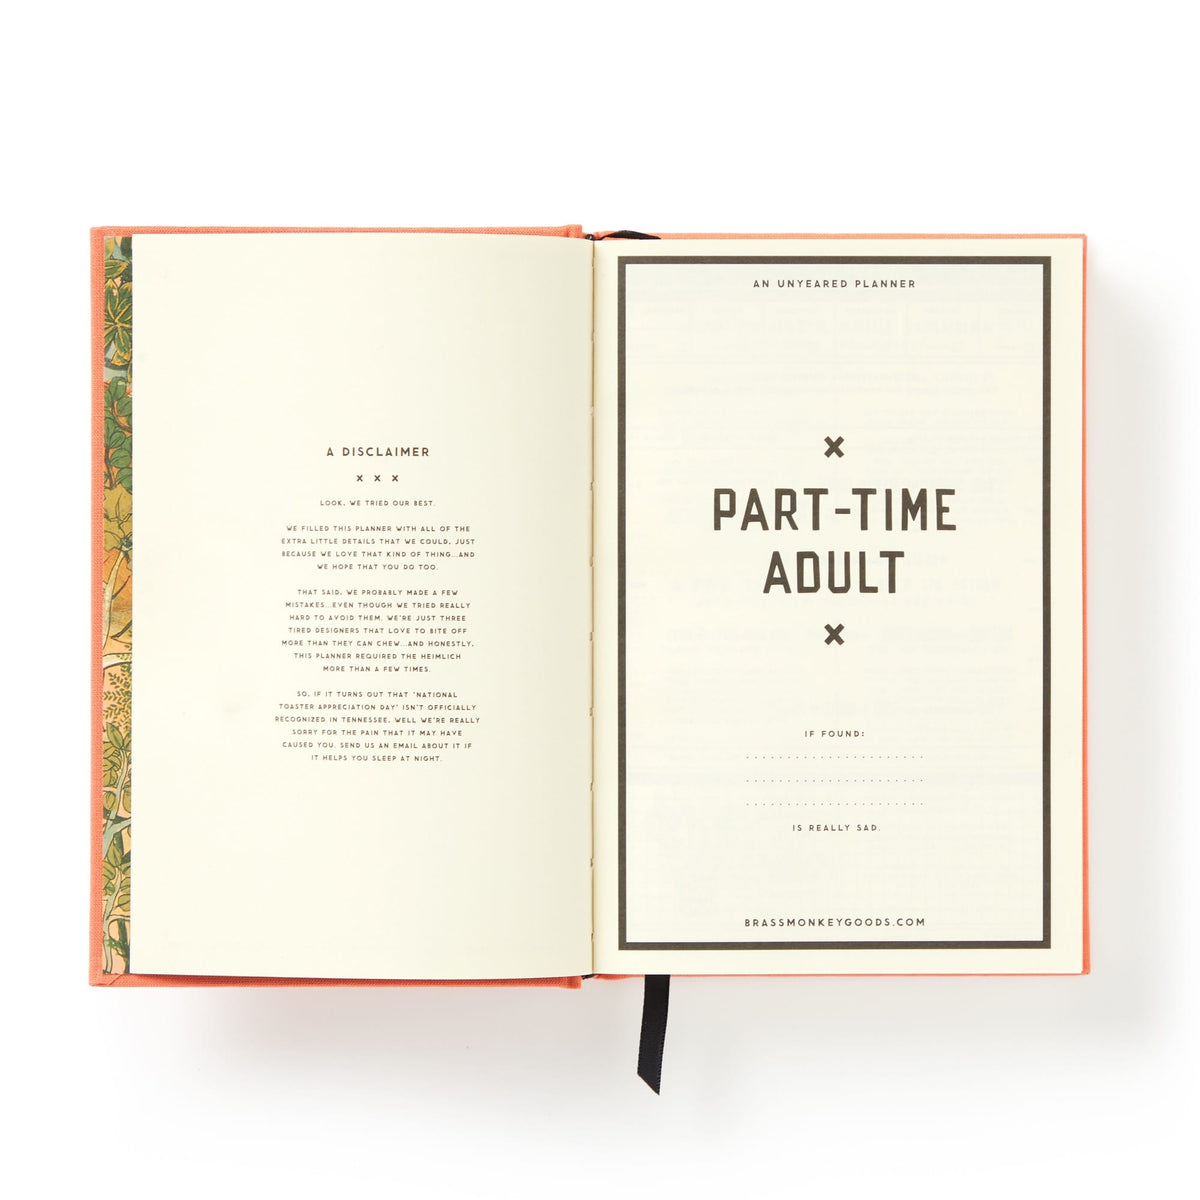 Part-time Adult - Daily Planner - Undated